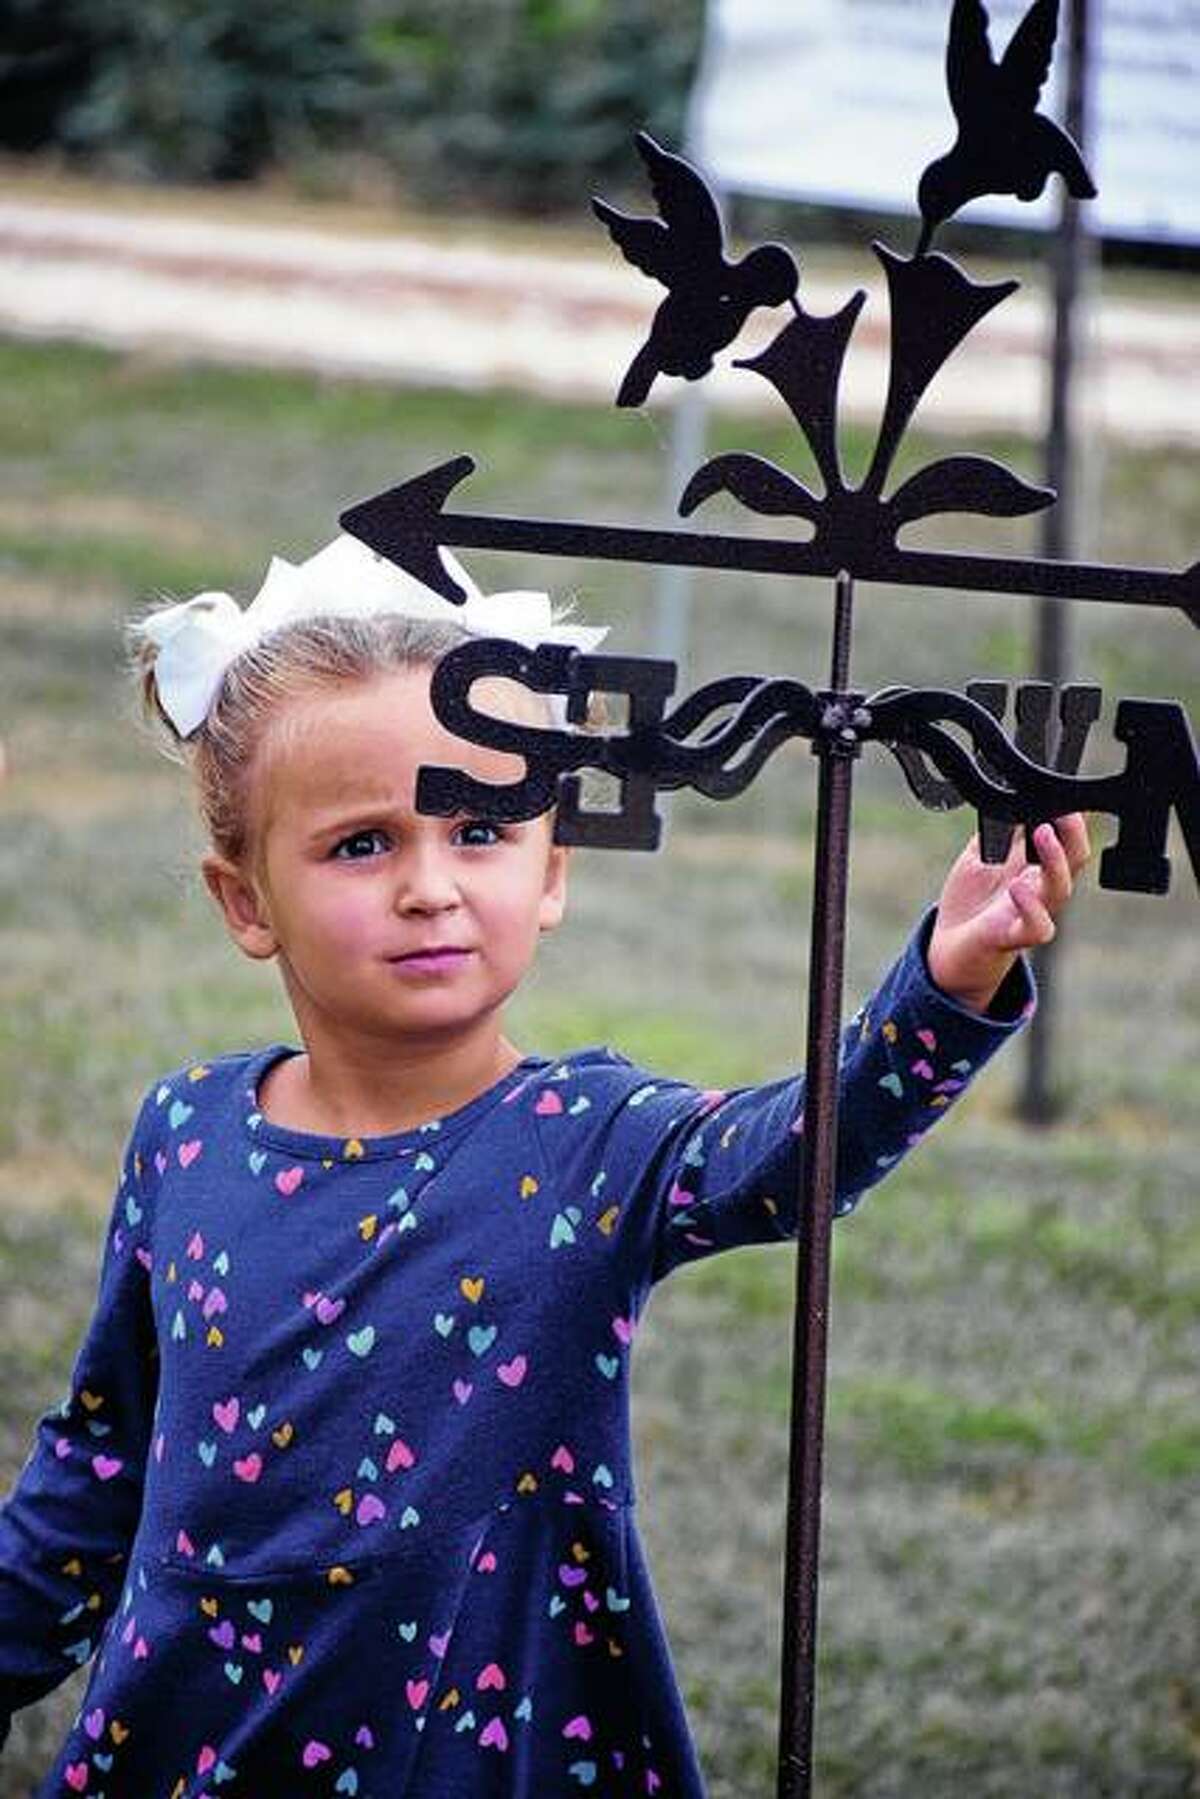 Three-year-old Ella Biedermann of Washington, who was in Illinois visiting her grandparents, plays with a hummingbird weather vane during Sunday’s Hummingbird Festival.